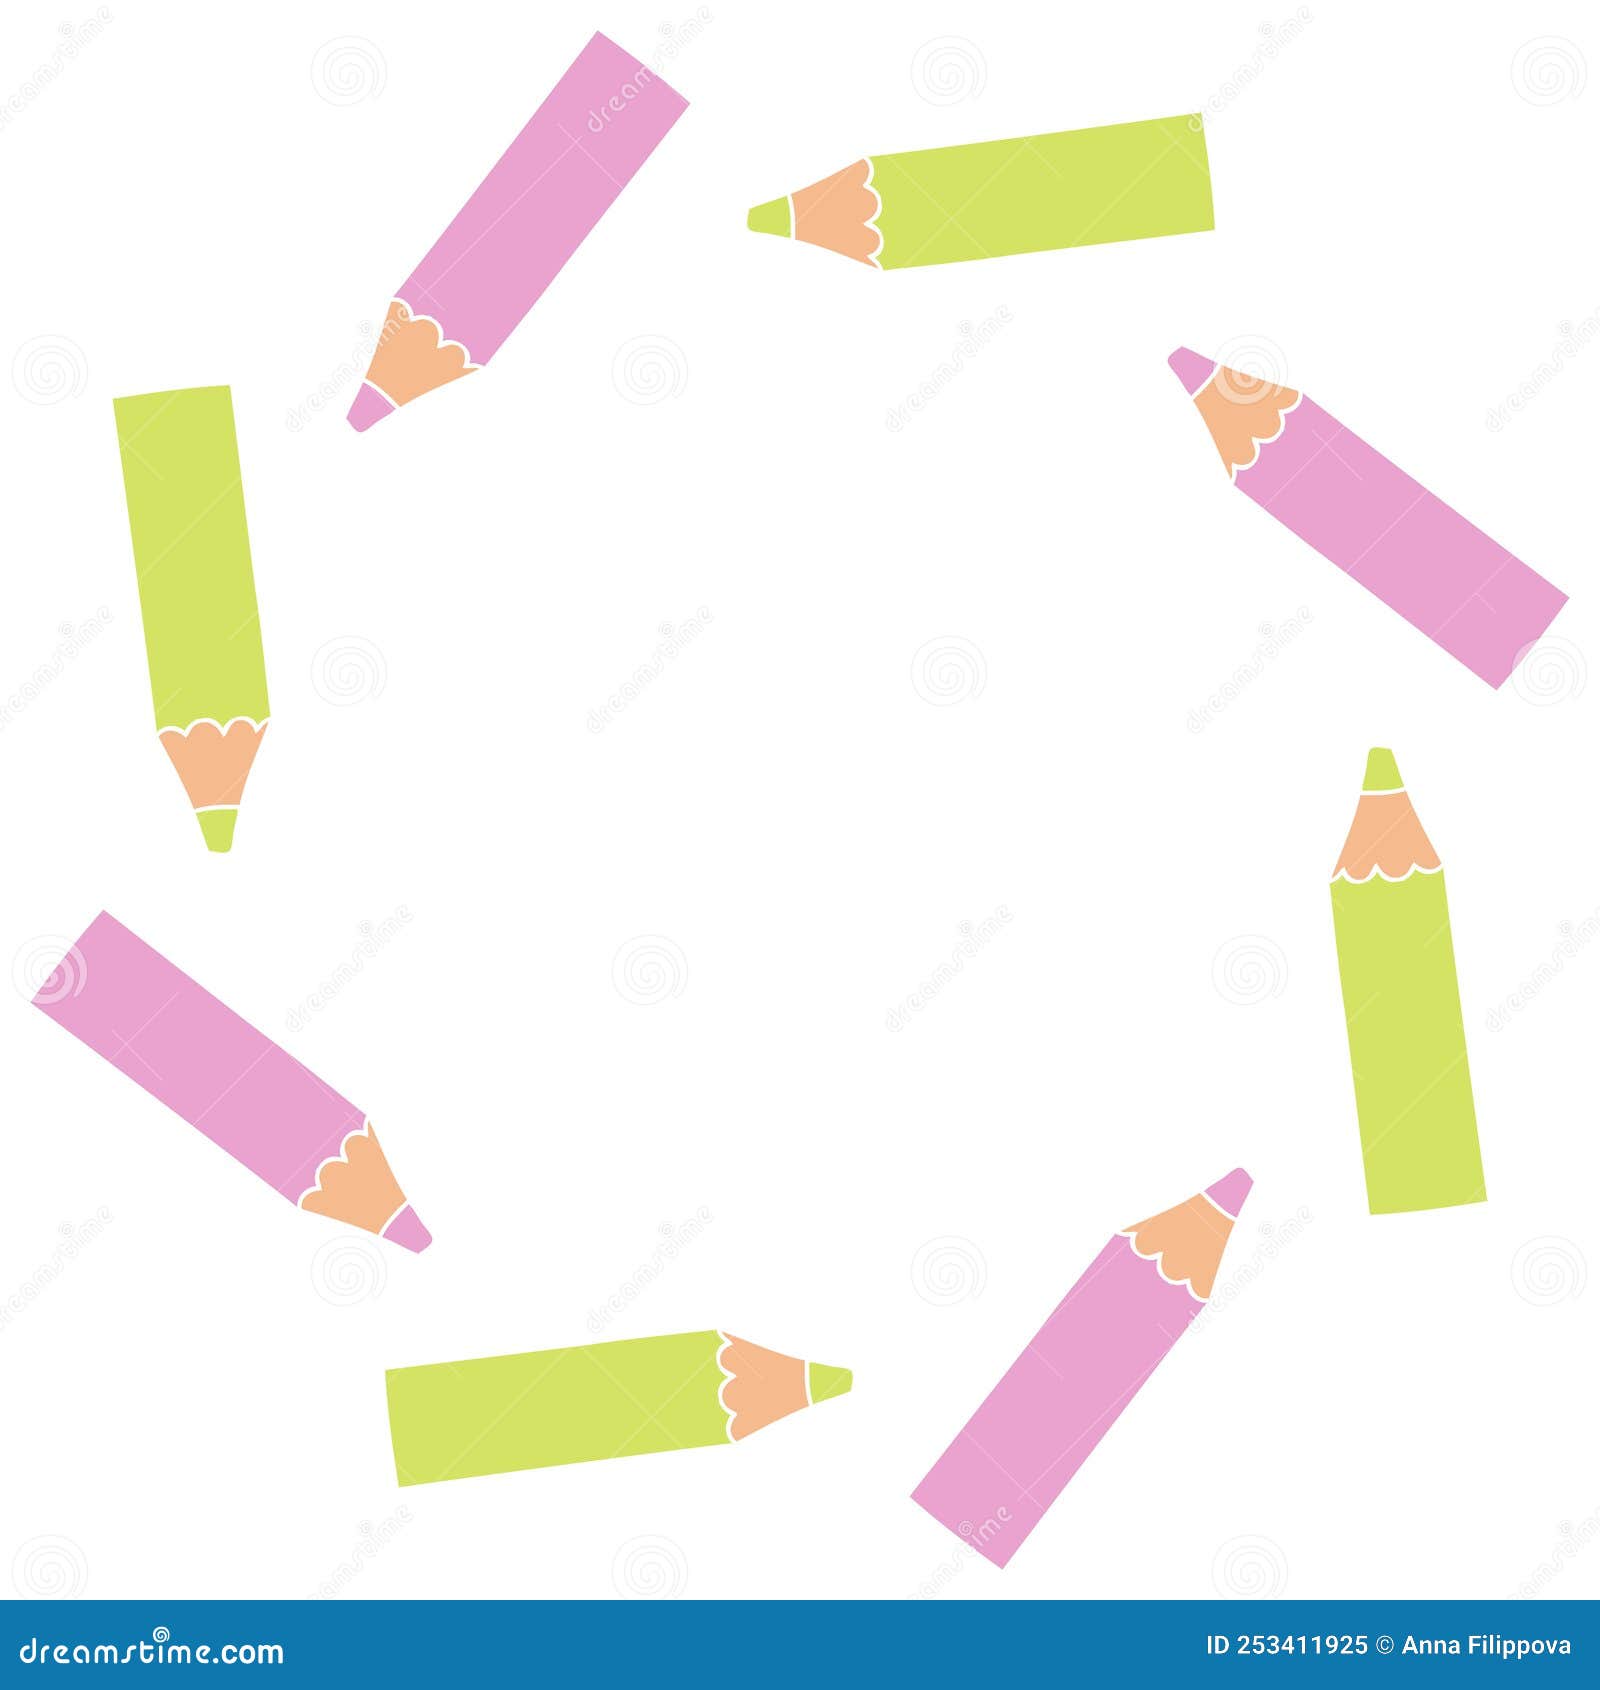 https://thumbs.dreamstime.com/z/circle-colored-pencils-shape-border-blank-space-text-perfect-decoration-notebook-planner-notepad-copybook-journal-253411925.jpg